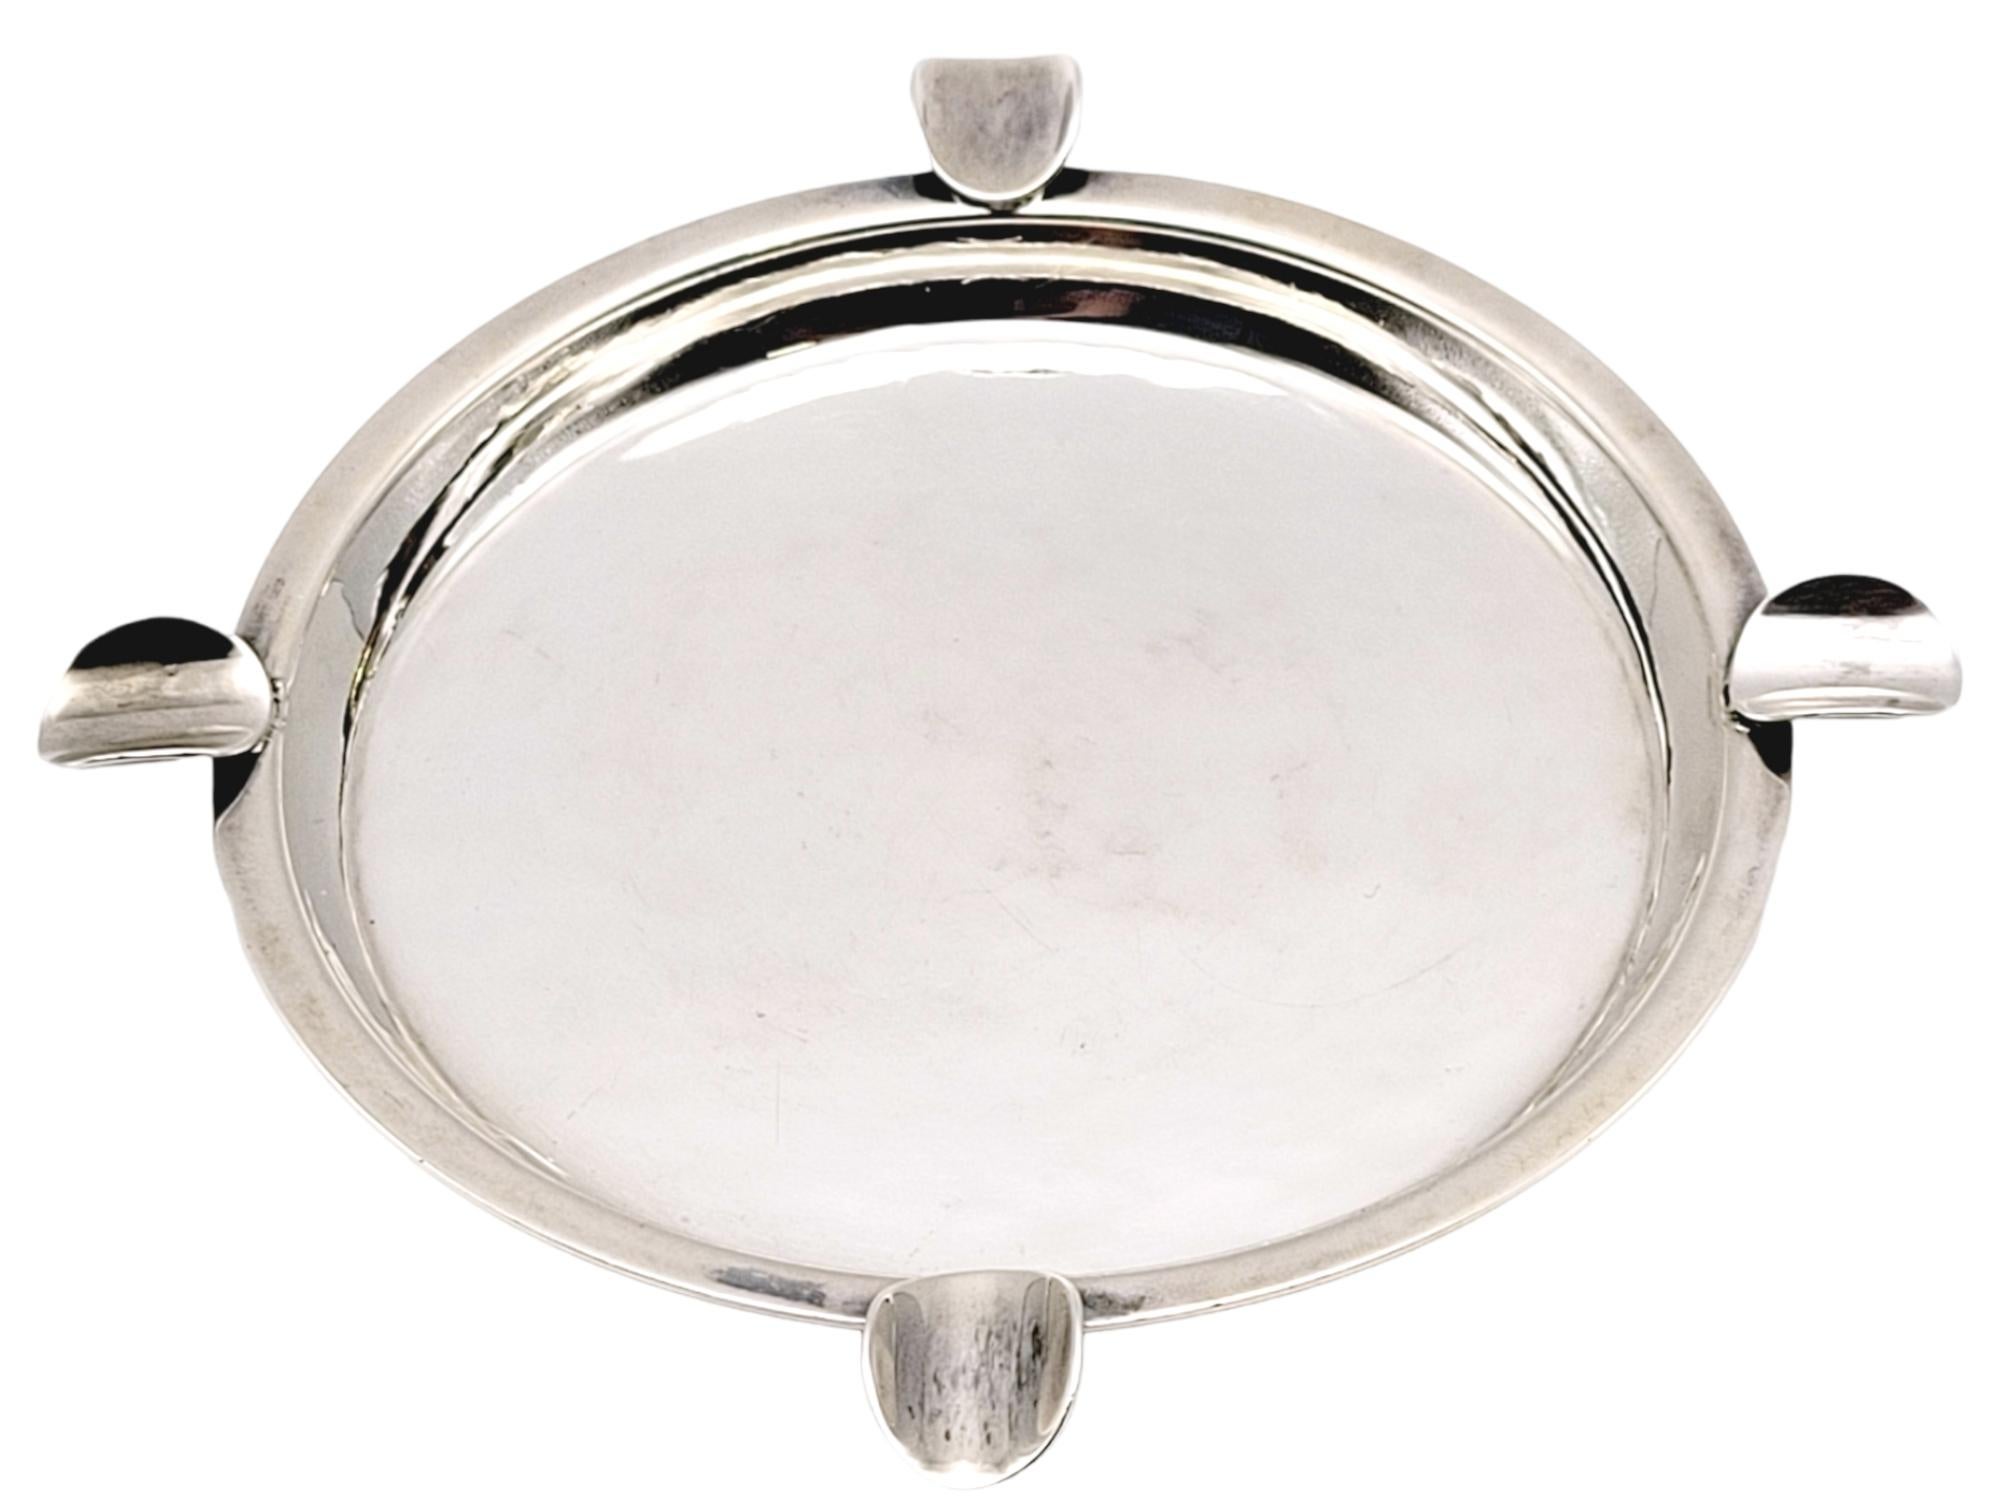 Stunning modern ashtray made of sterling silver. Handmade by the incredible silversmith Carl Poul Peterson. This exceptional piece features a smooth polished finish and four places to rest a cigarette or cigar. The ashtray's center tray is